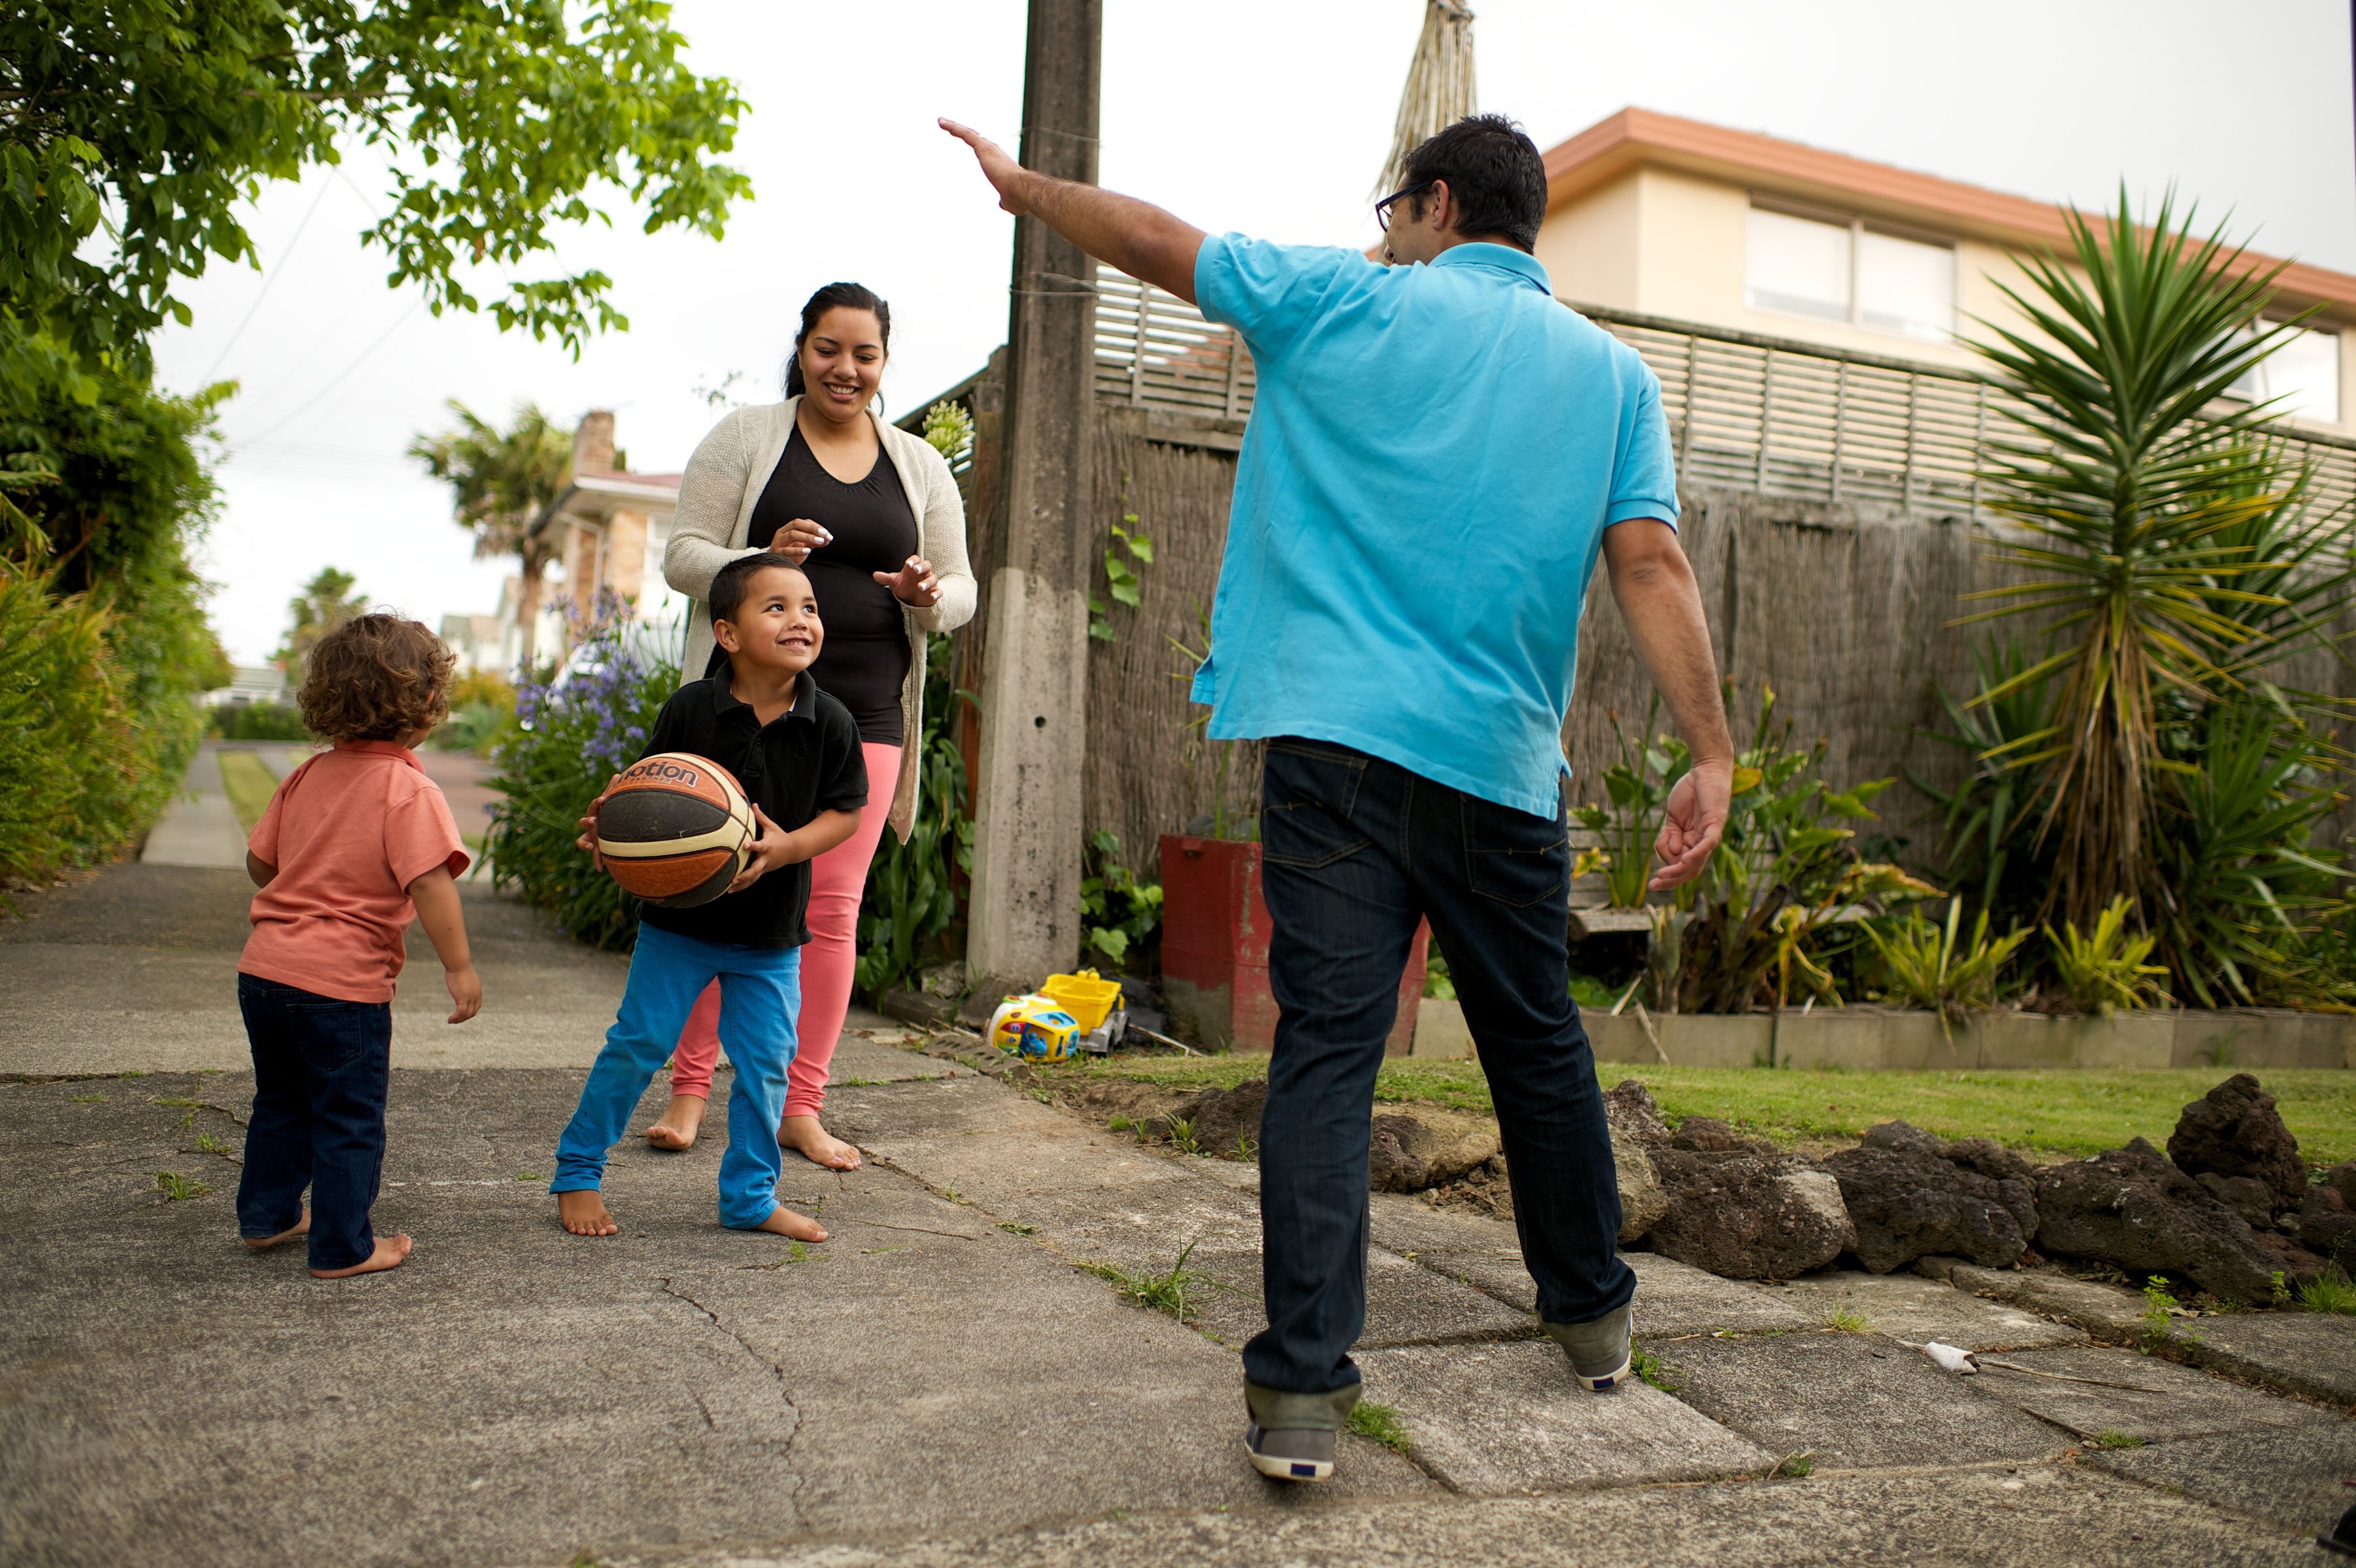 A mother and father play basketball with their two young children.